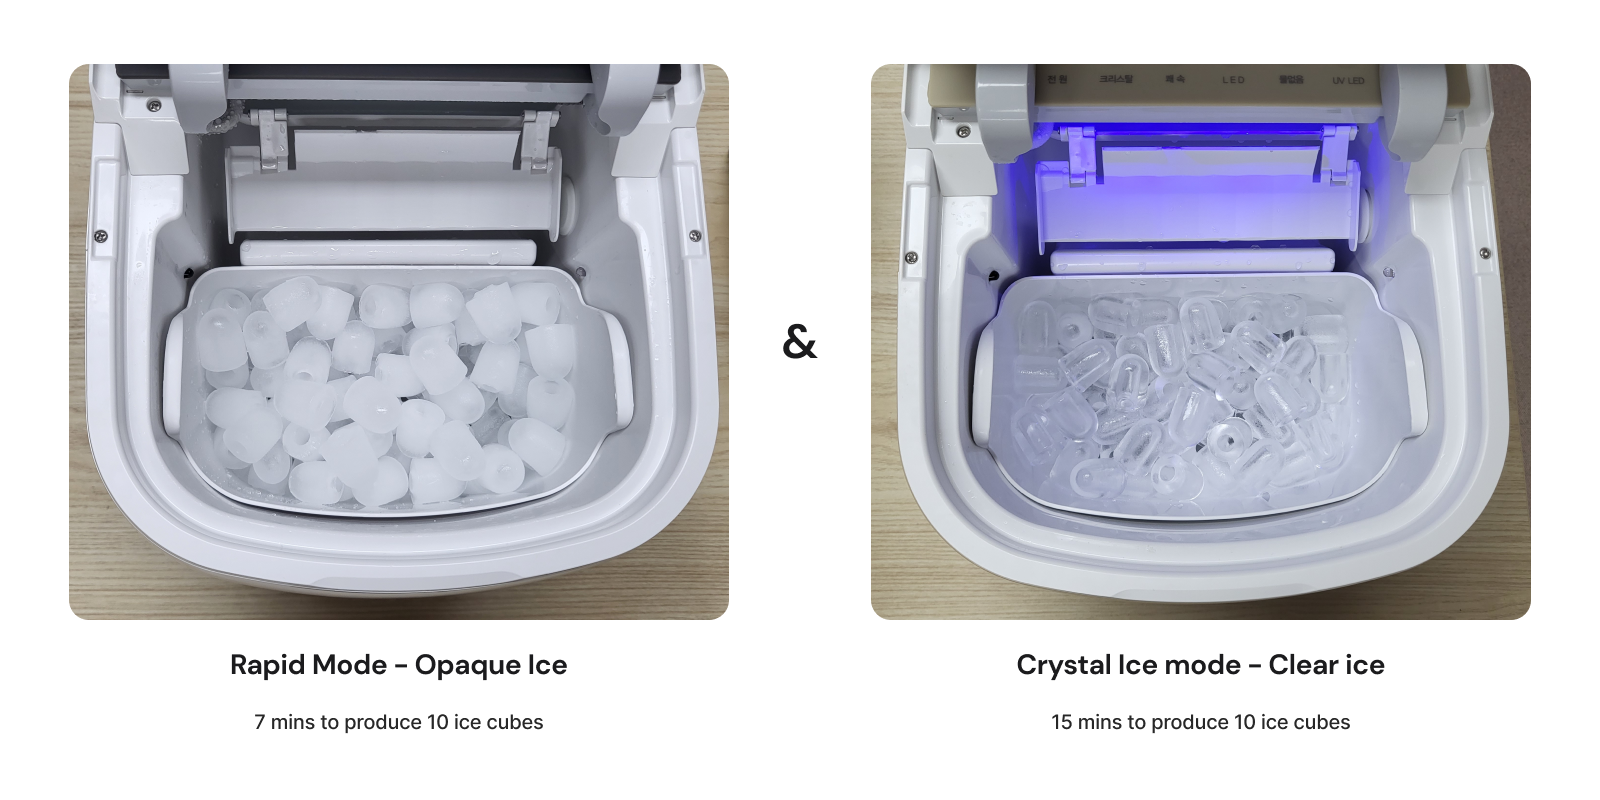 Pictures of rapid mode opaque ice that takes 7 minutes to produce 10 cubes and crystal ice mode clear ice that takes 15 minutes to product 10 cubes